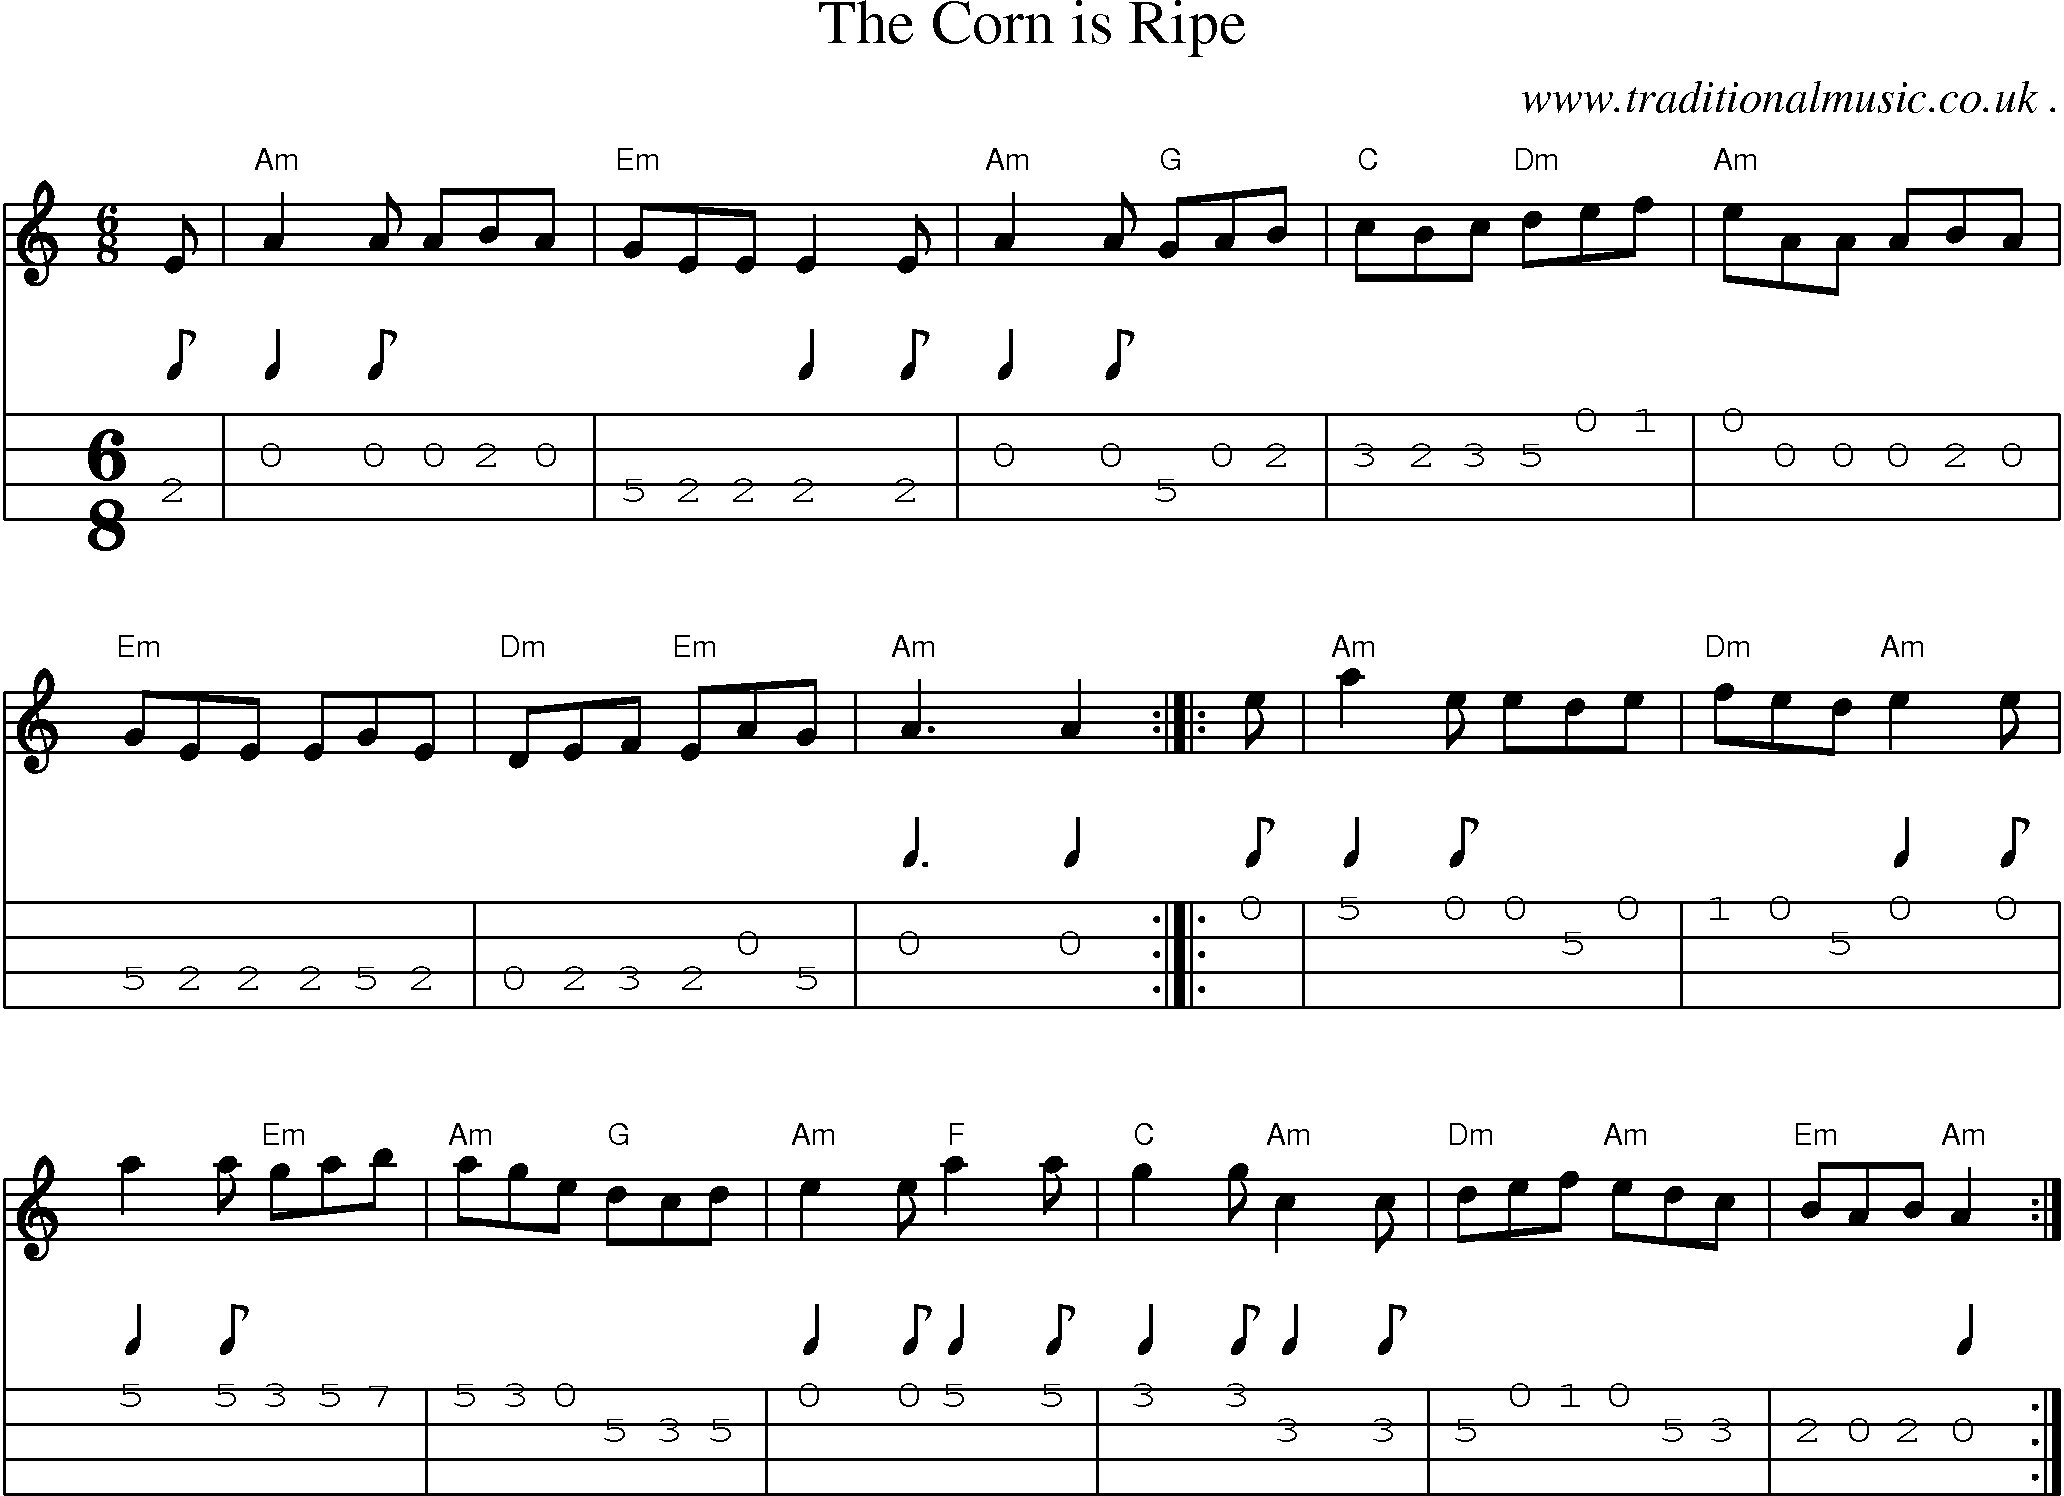 Music Score and Guitar Tabs for The Corn Is Ripe